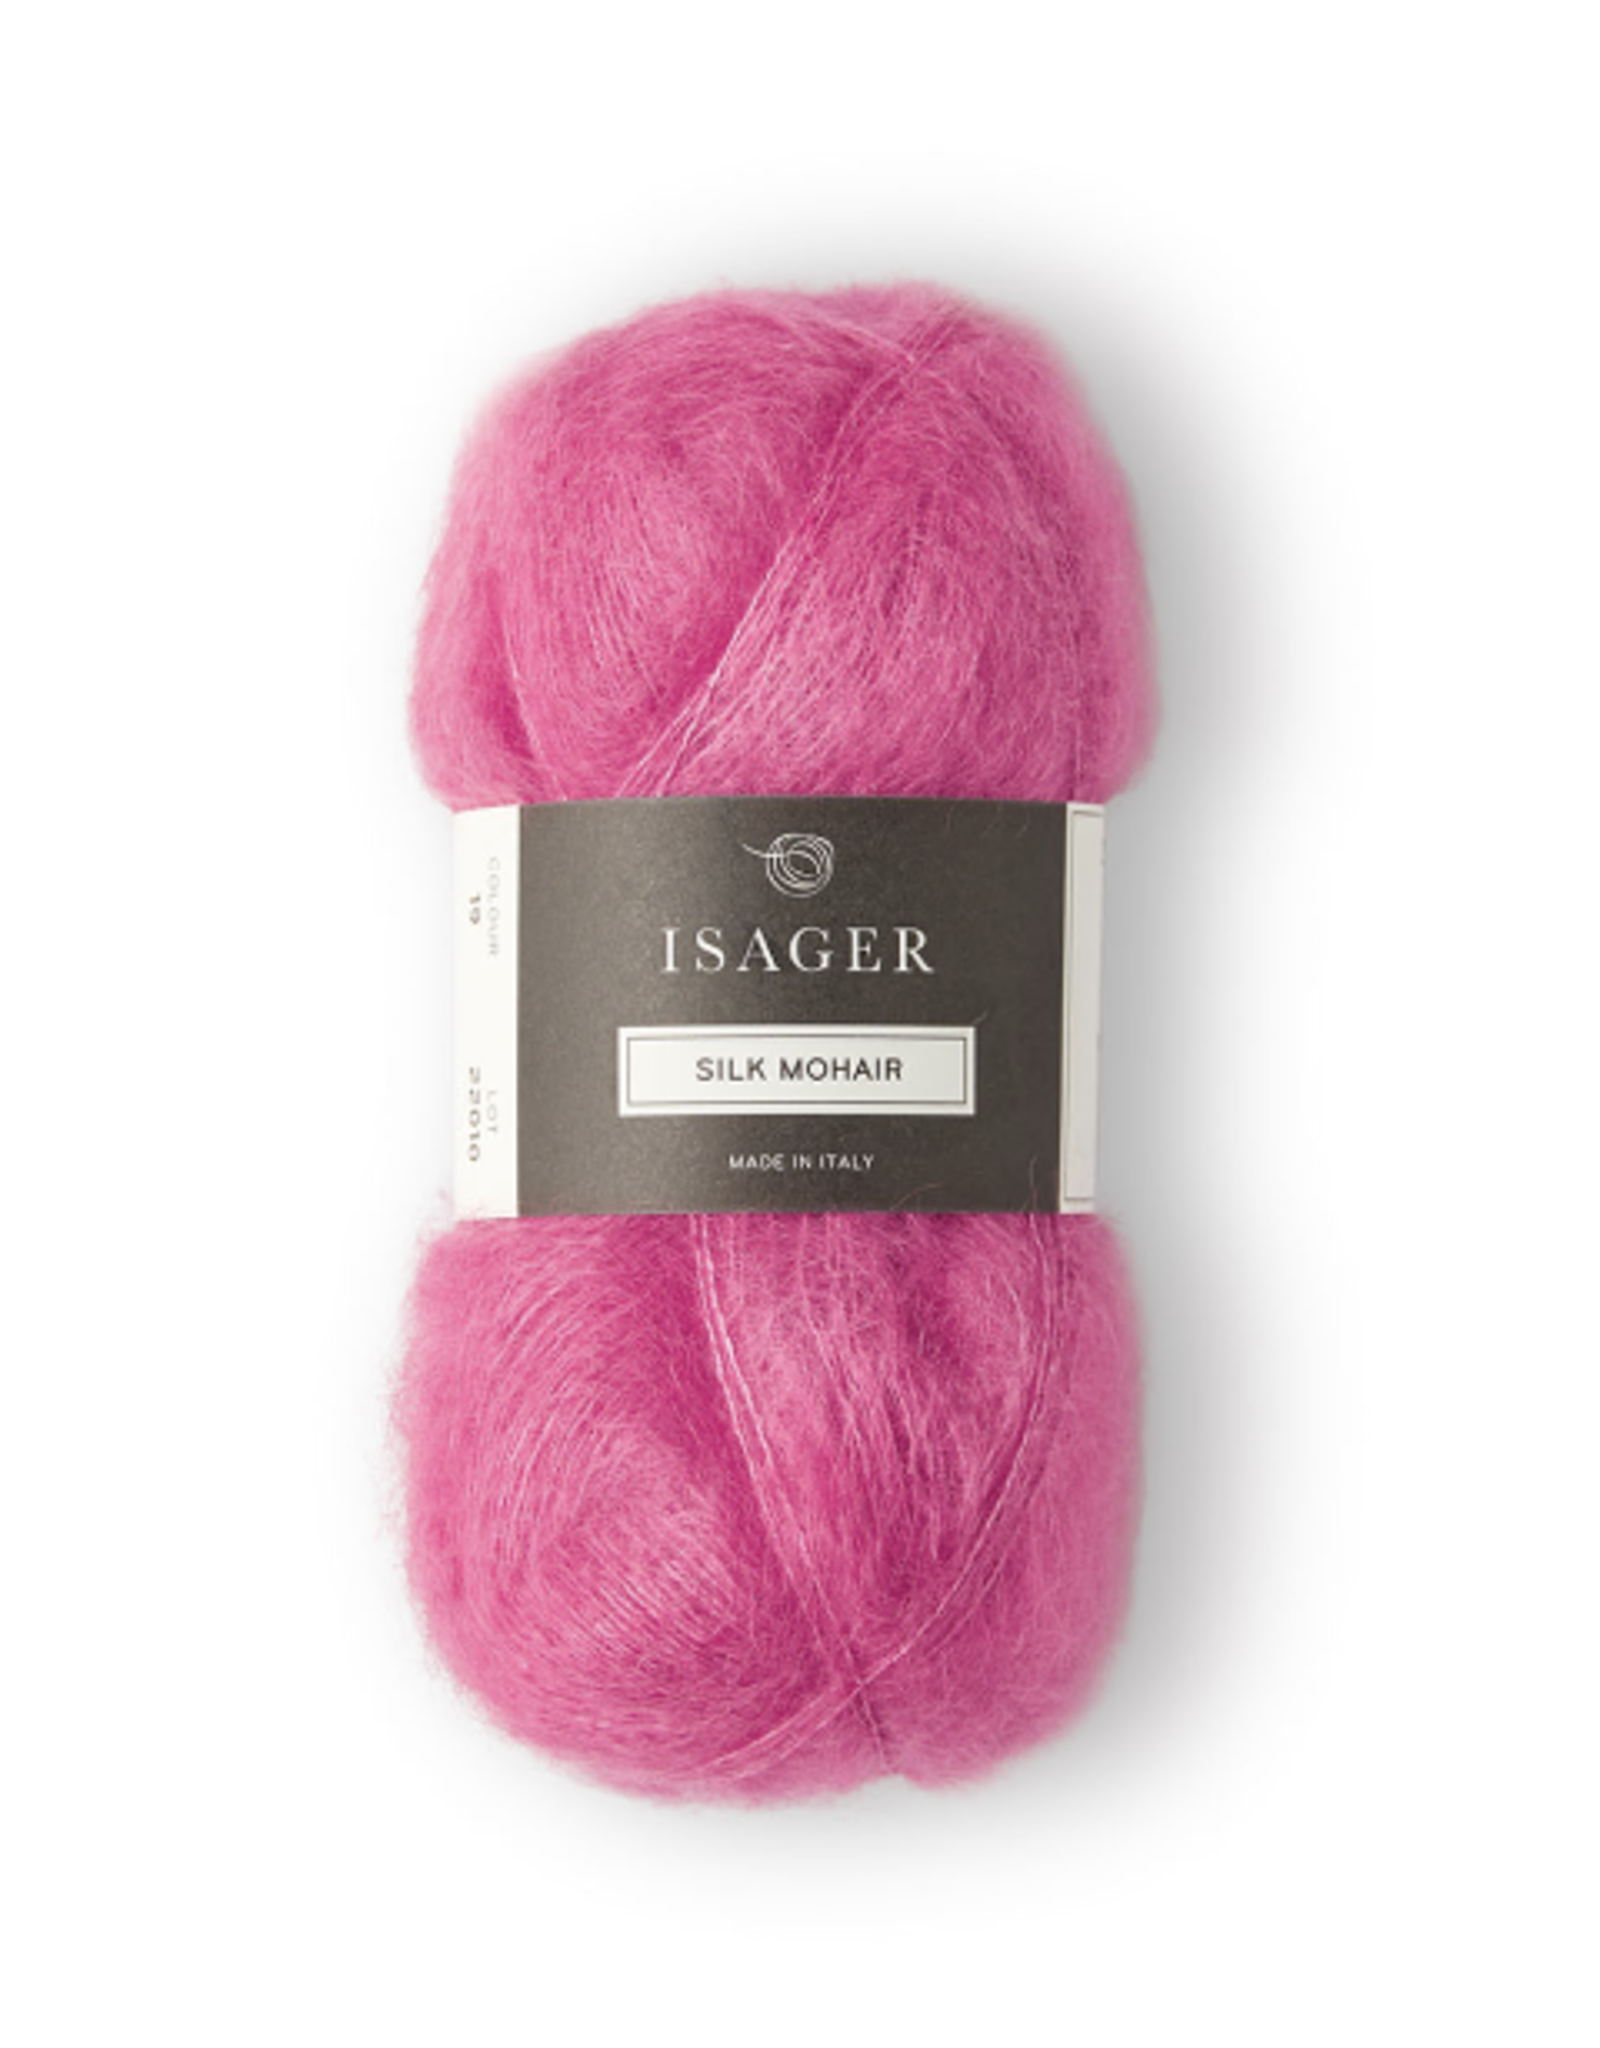 Isager Isager Silk Mohair 19 bright pink